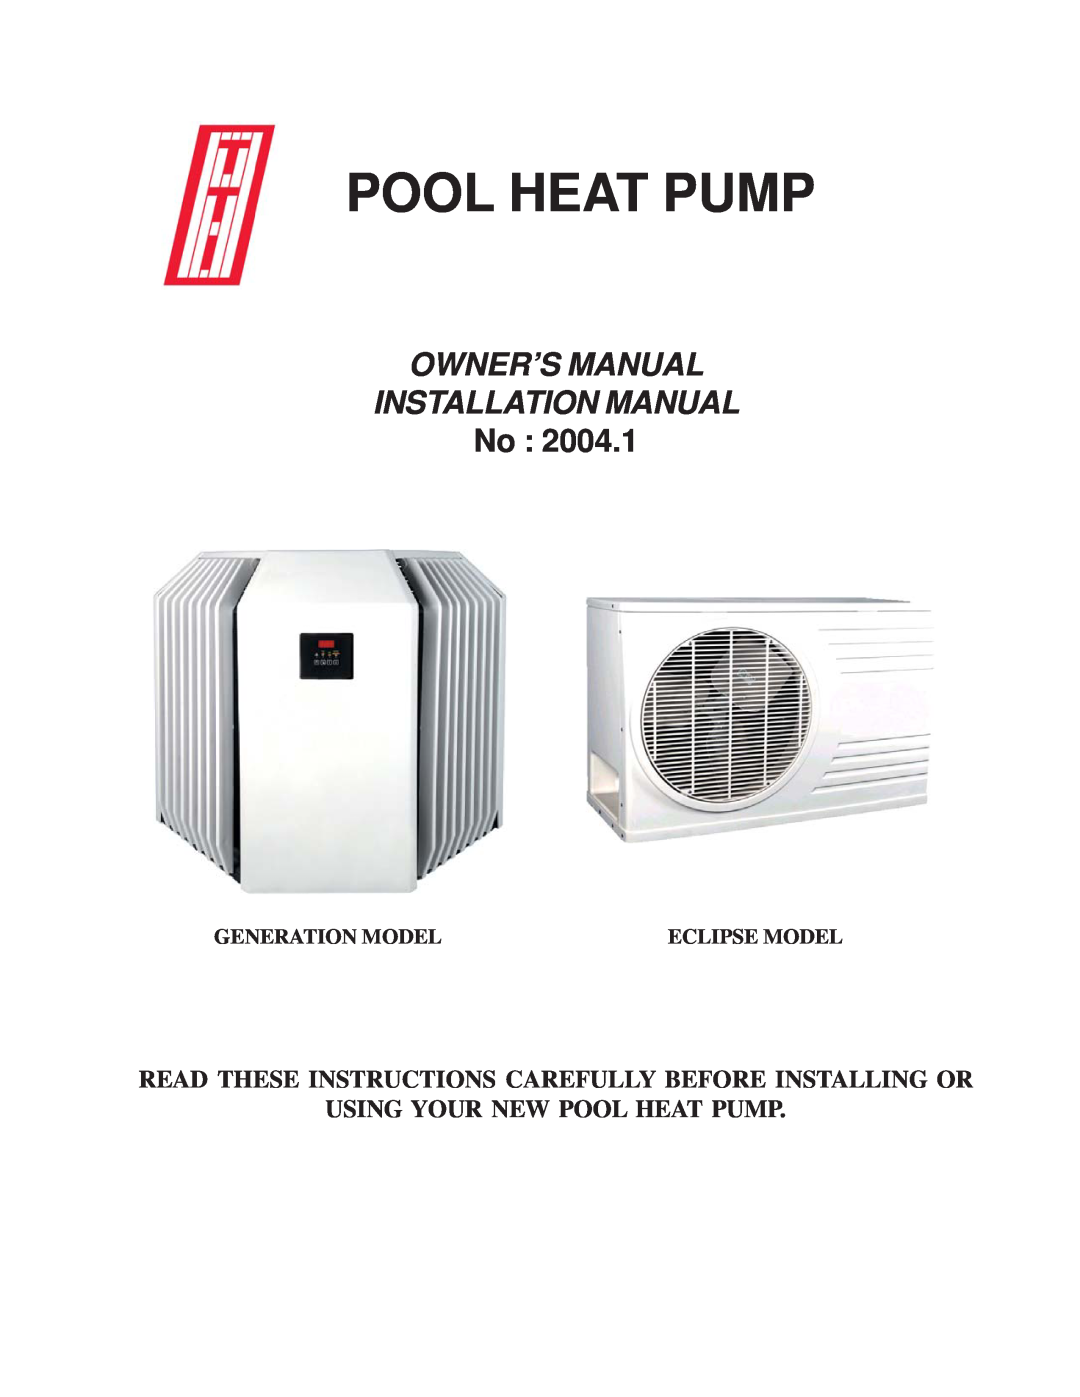 Taylor owner manual Owner’S Manual Installation Manual, Using Your New Pool Heat Pump, Generation Model, Eclipse Model 